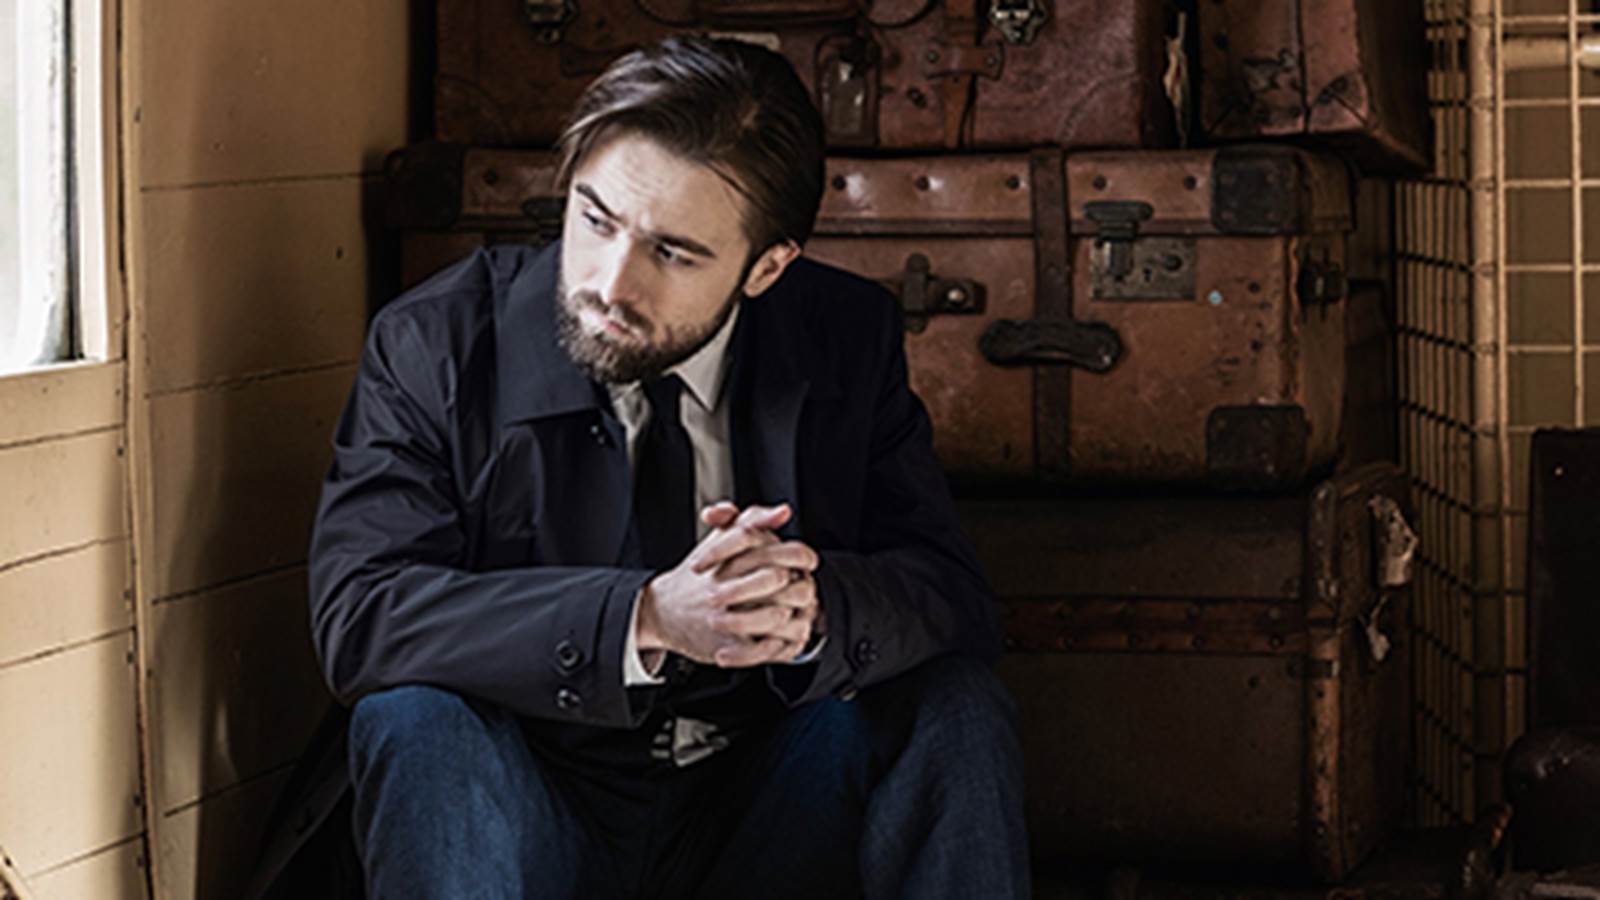 Daniil Trifonov: A Pianist Ahead Of His Time! Artist Biography, Discography, & Career